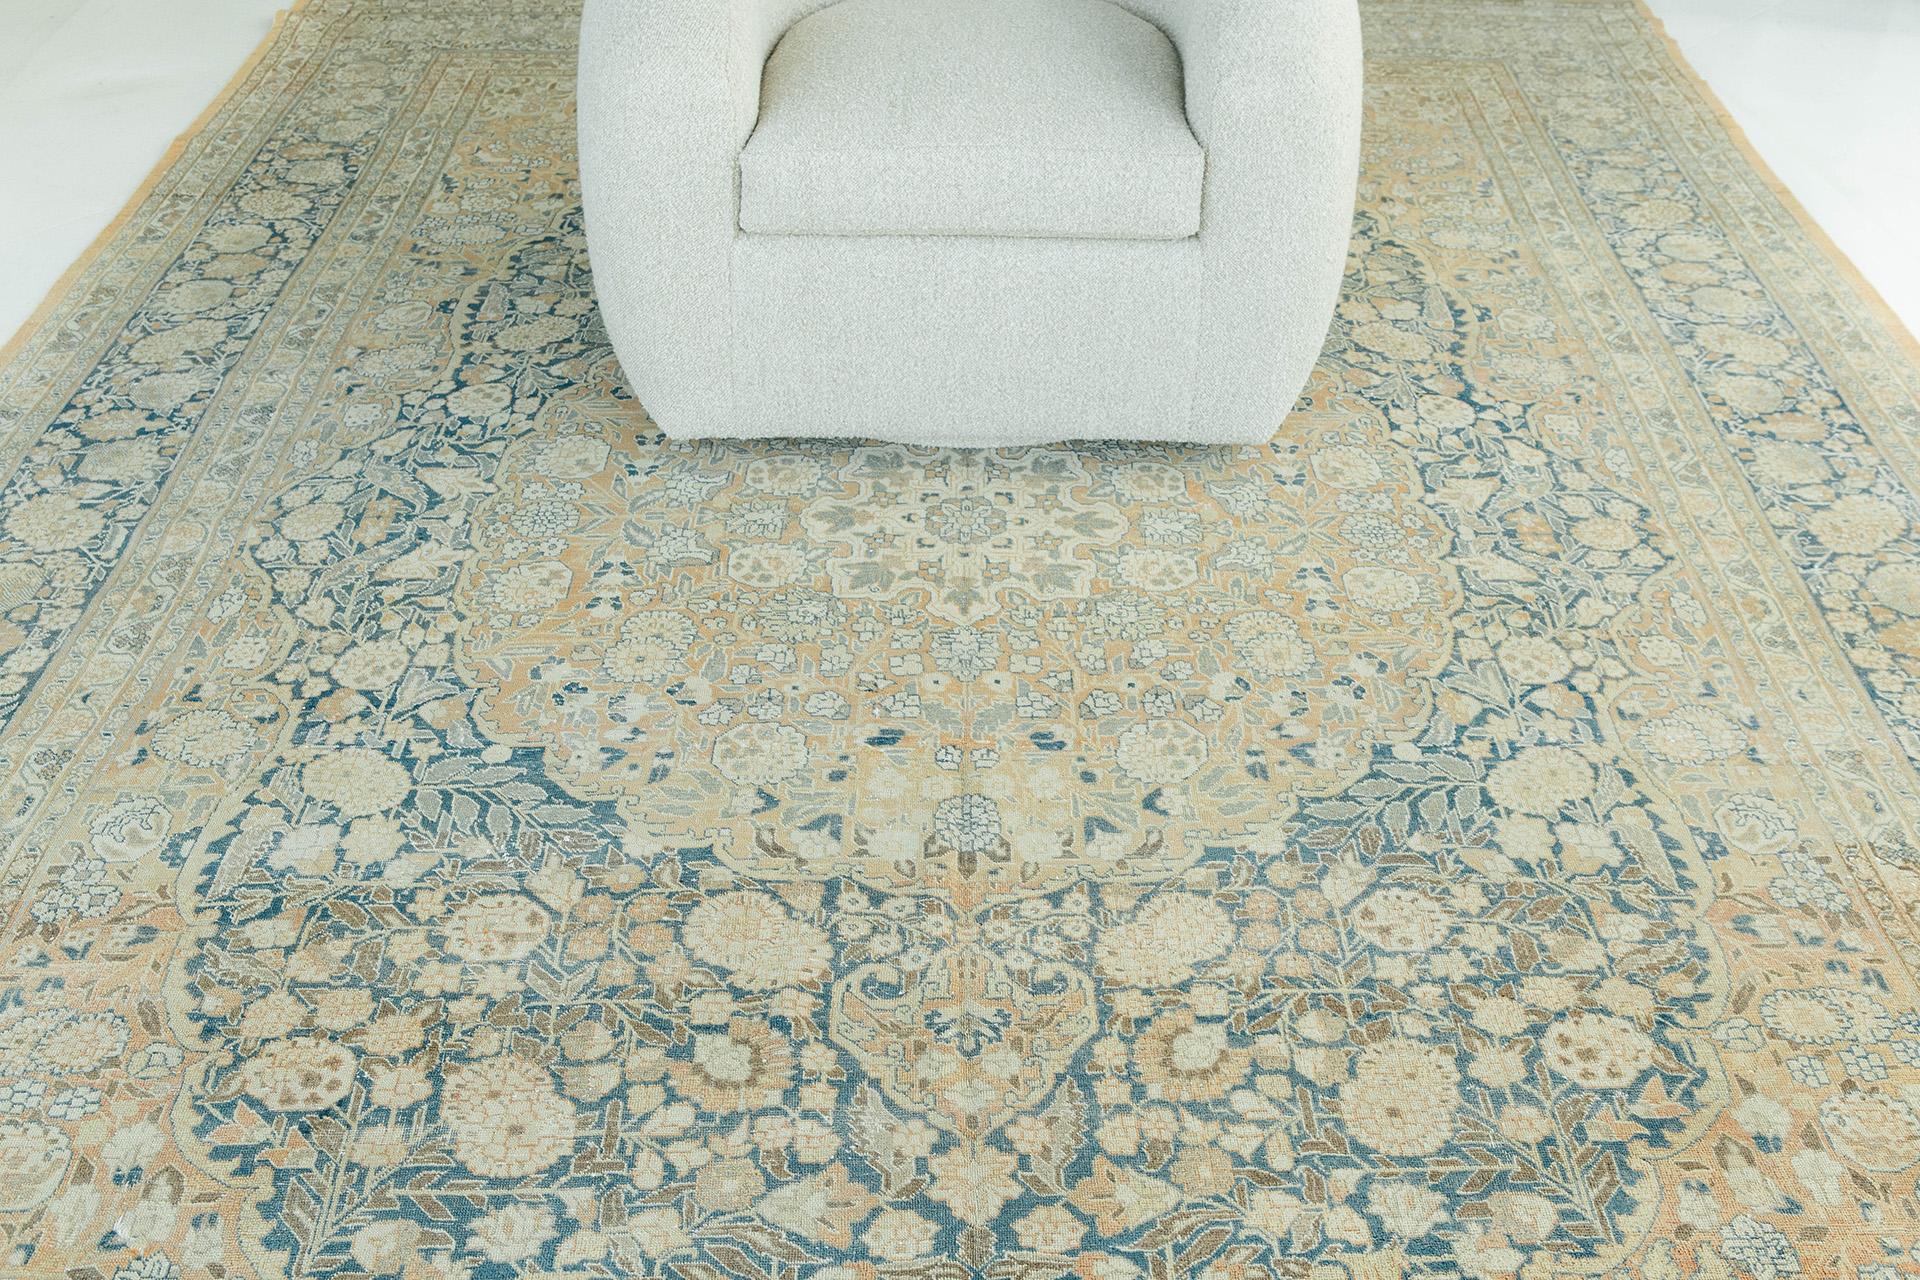 Antique Tabriz warm sand and teal ground with ivory, sage green and taupe elements. Axial design with fields brimming with foliated lattice and floral motifs. Central medallion with pendants at top and bottom. Oval field is enclosed in brimming